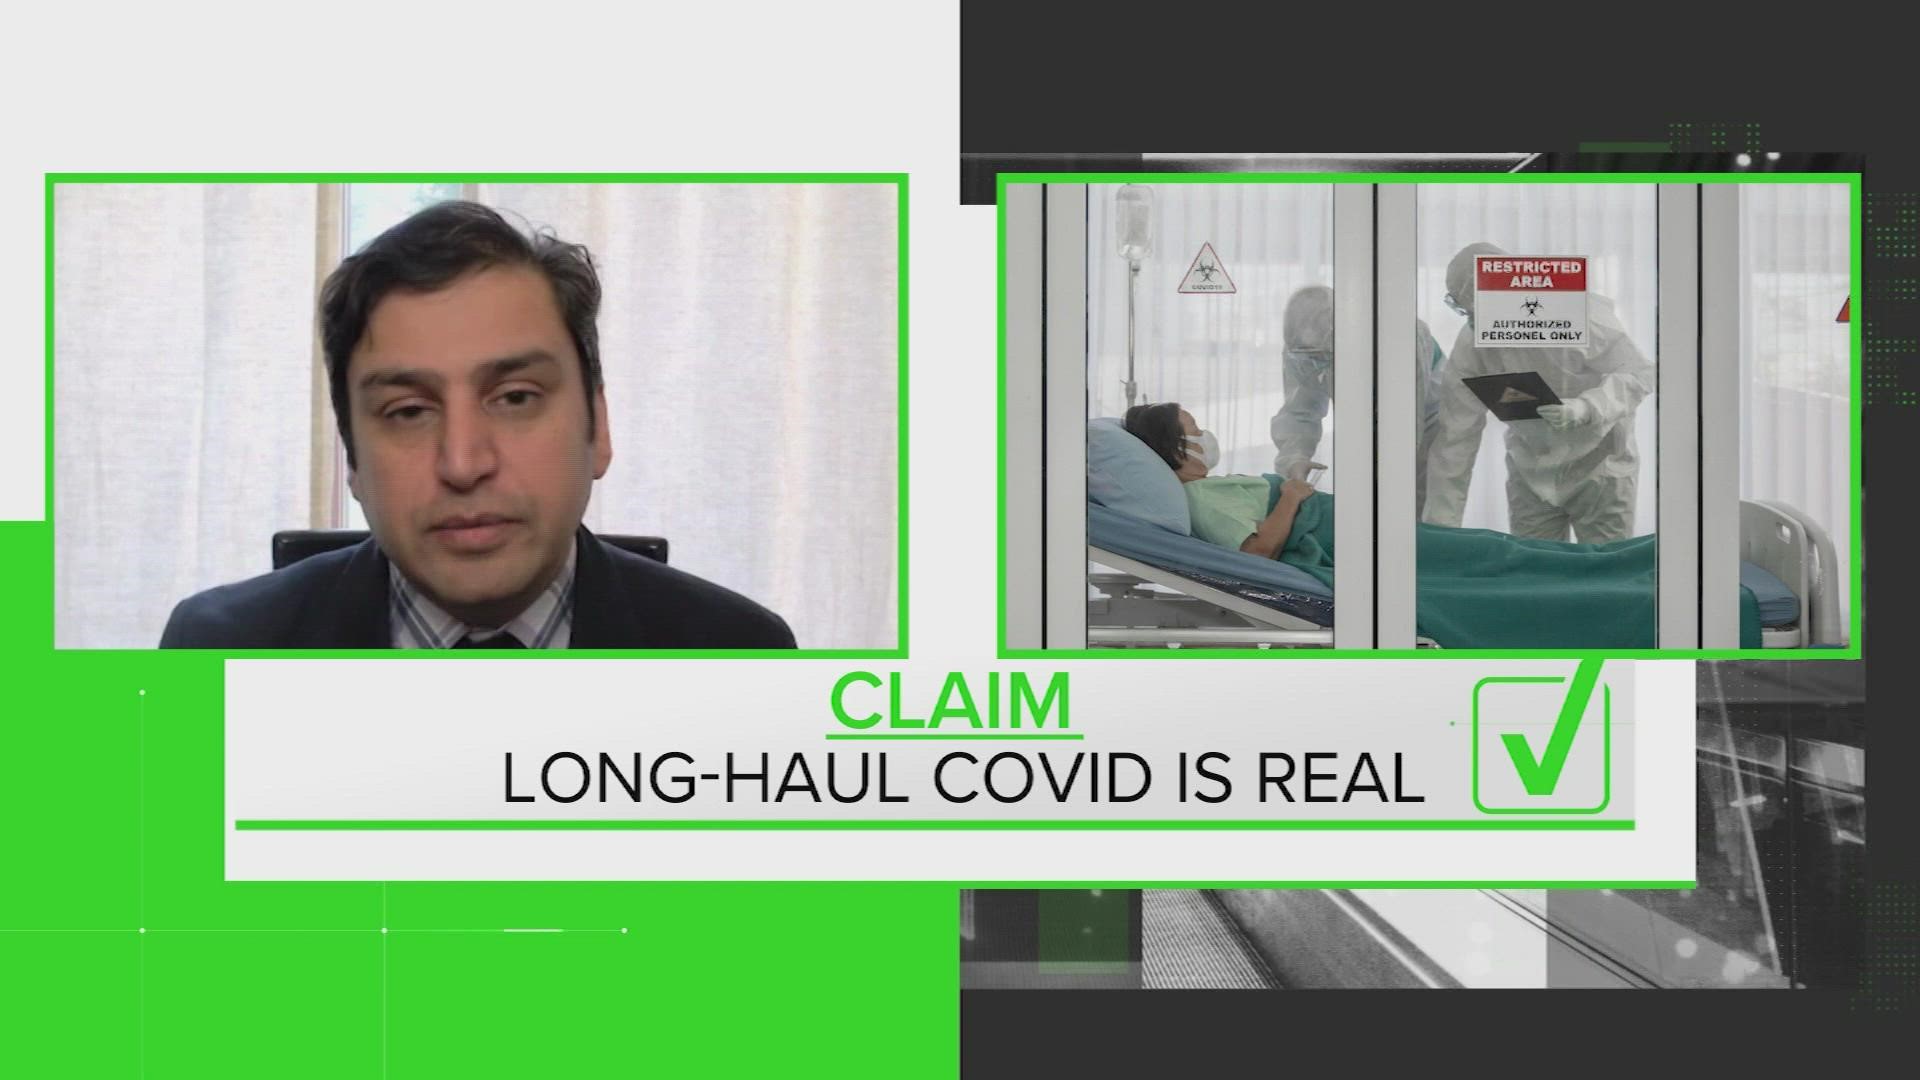 Dr. Amesh Adalja says, "Though it is extremely rare, long COVID is more likely to occur in unvaccinated individuals."